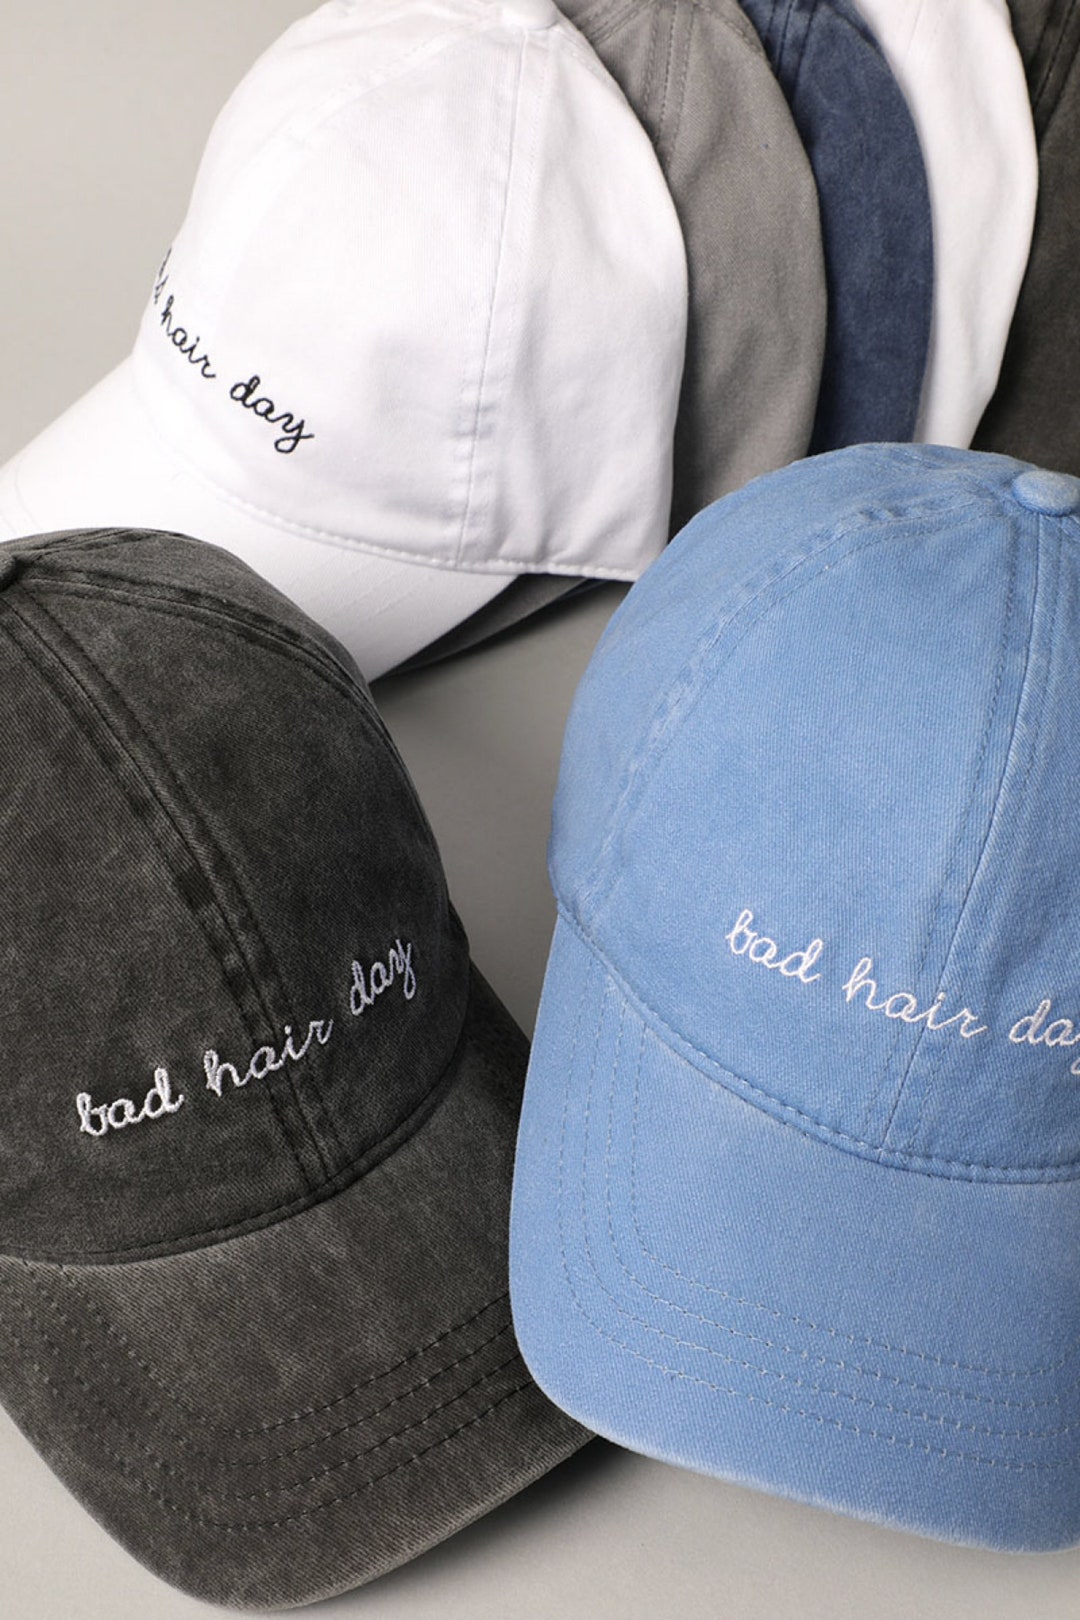 Bad Hair Day Hat Personalized Baseball Cap Embroidery Cap - Etsy